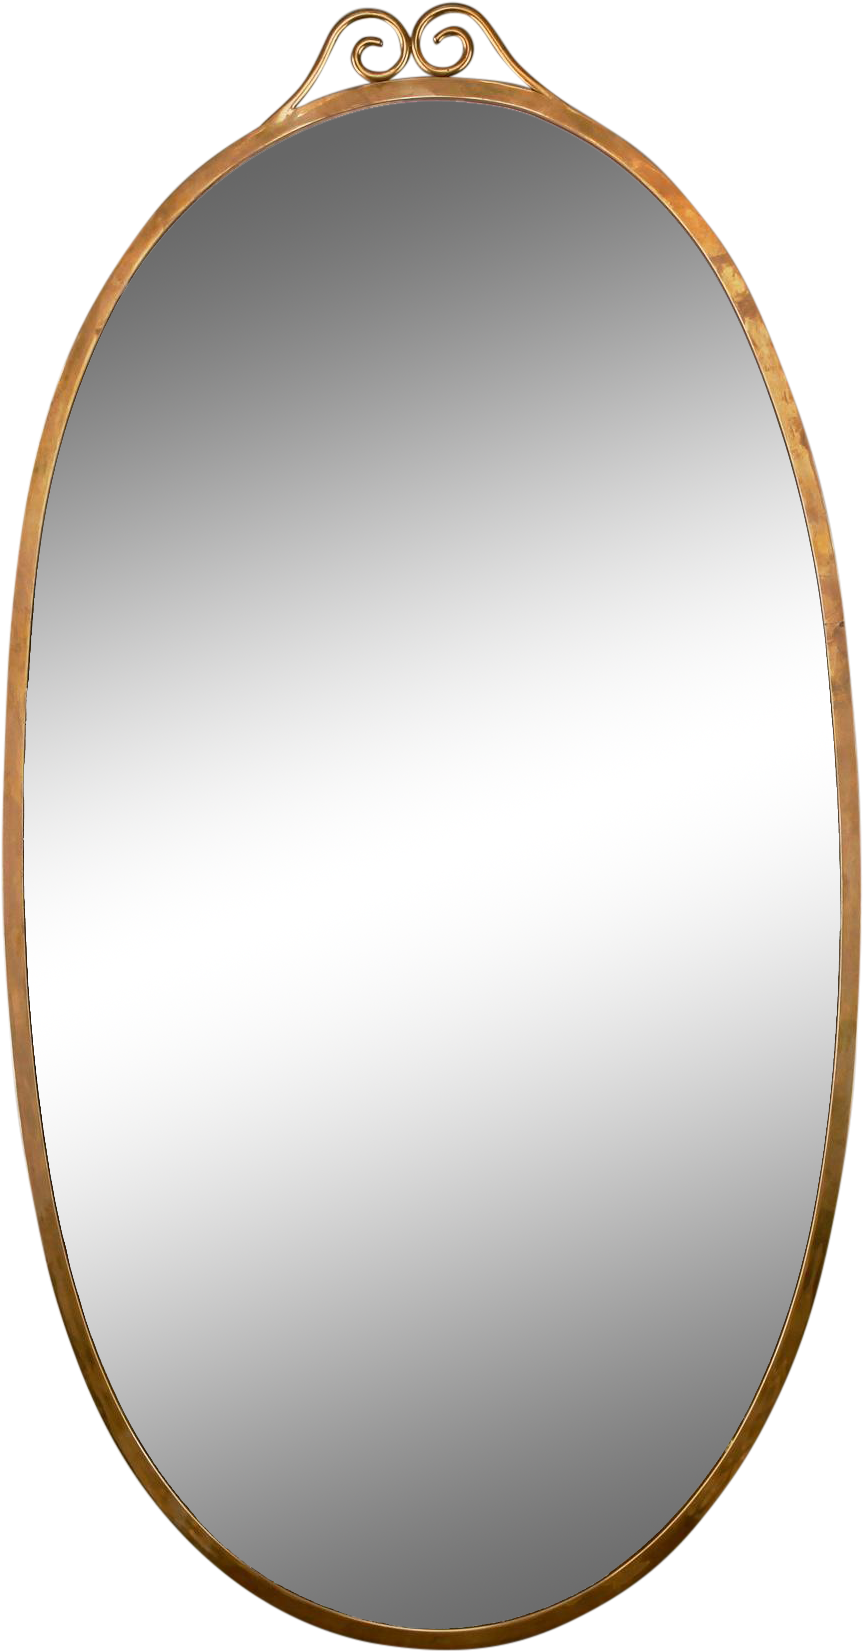 A Mirror With A Gold Frame